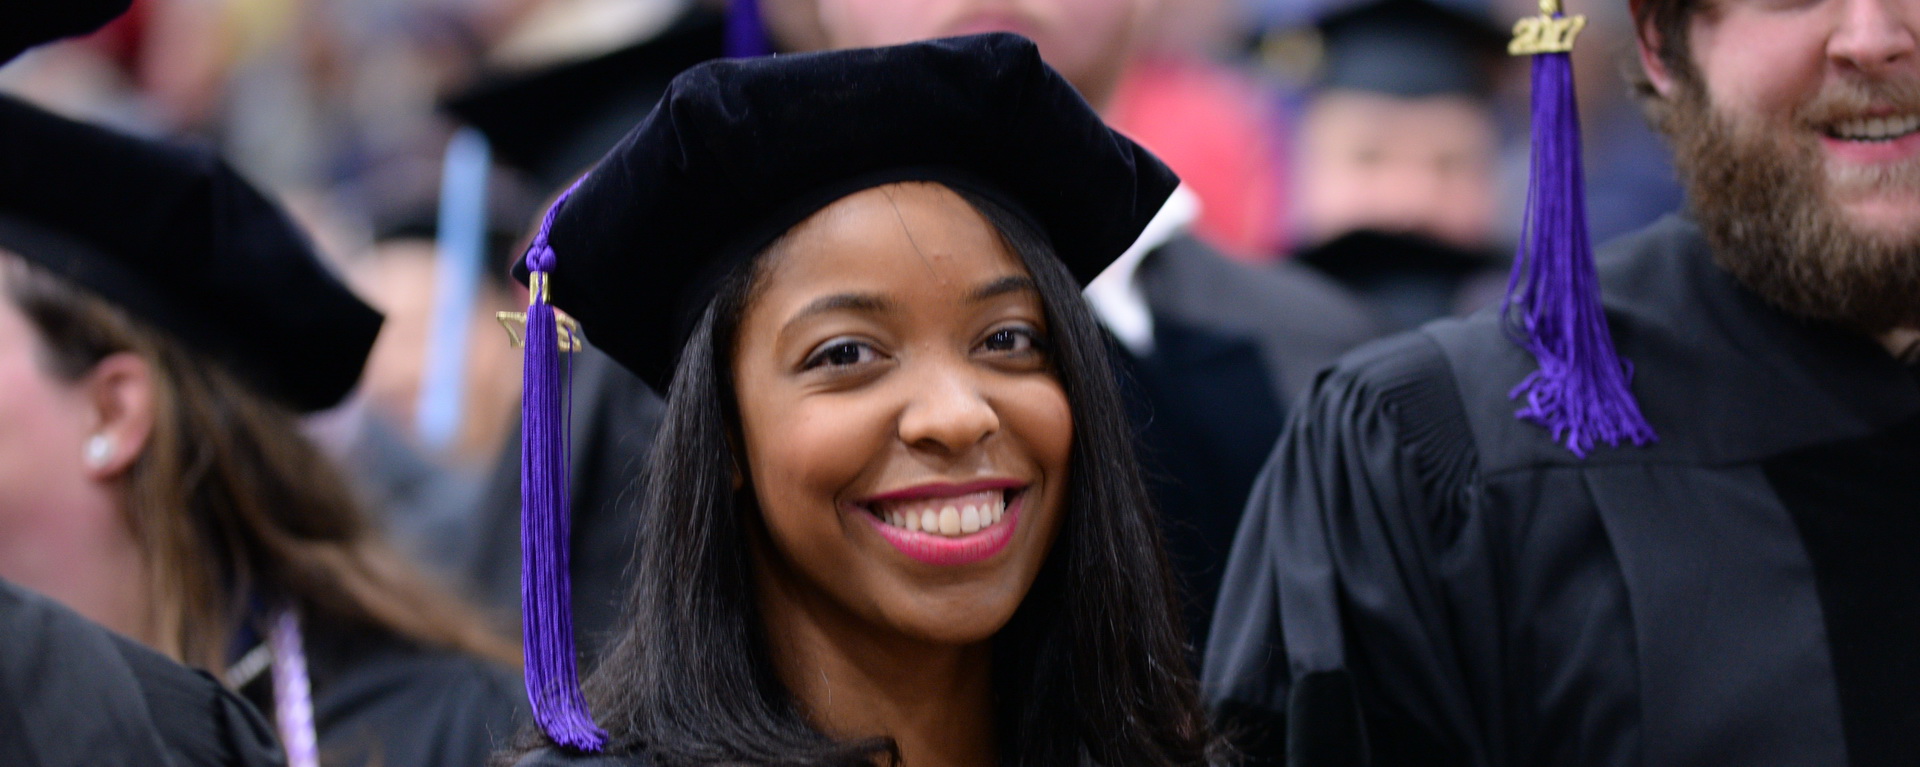 female student at graduation and smiling